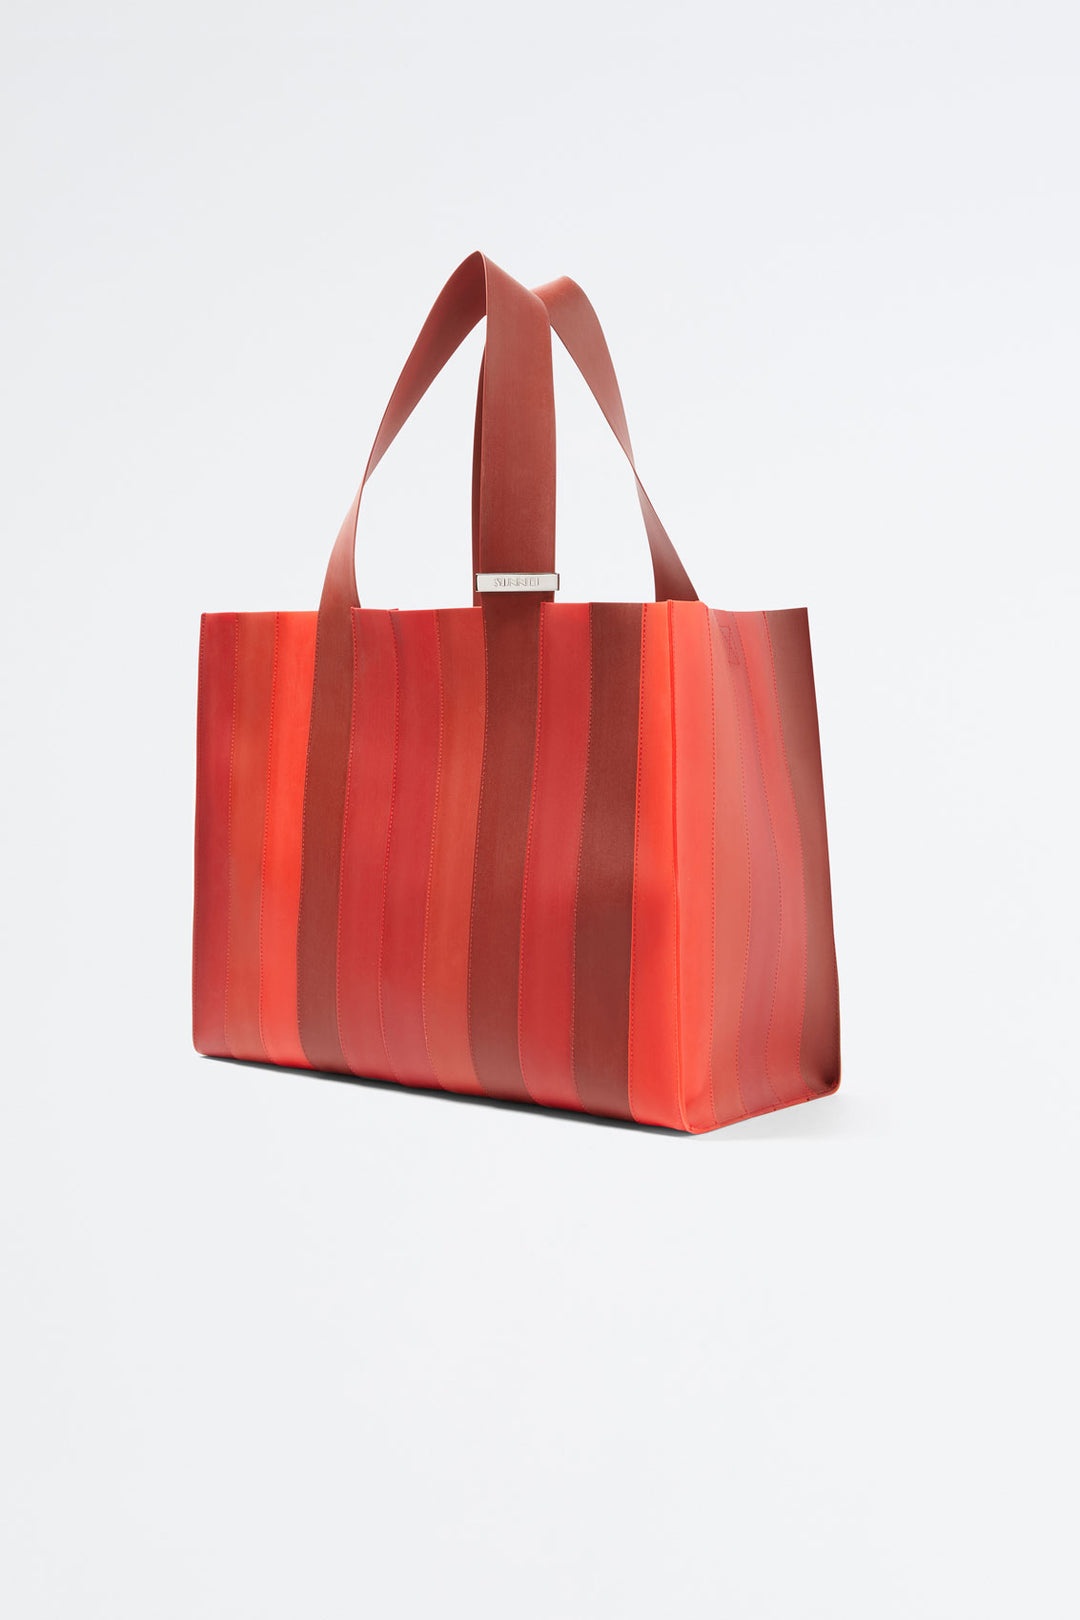 GRADIENT RED PUDDING PARALLELEPIPEDO BAG - 2